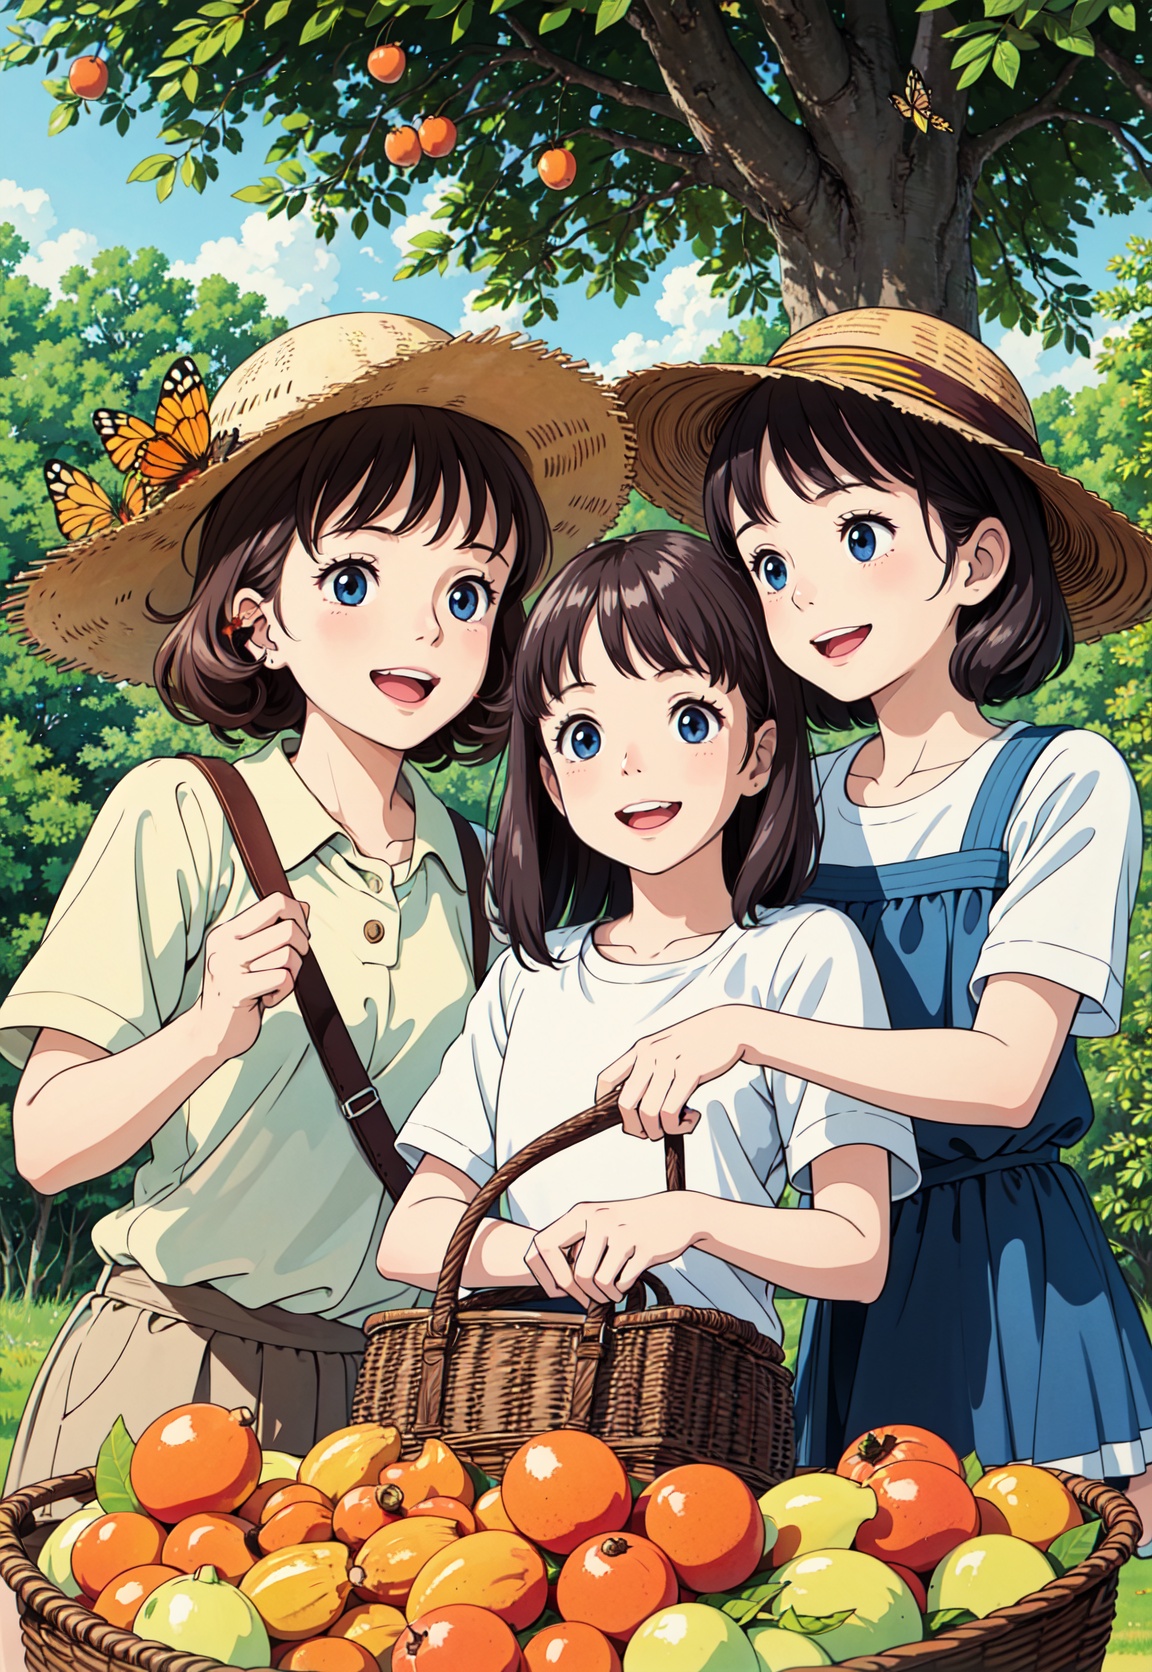 A group of little girls sat under a loquat tree eating a basket full of loquats. Close ups, straw hats, curly hair, big eyes, smiling, laughing heartily, kittens catching butterflies, the tree covered in loquats,